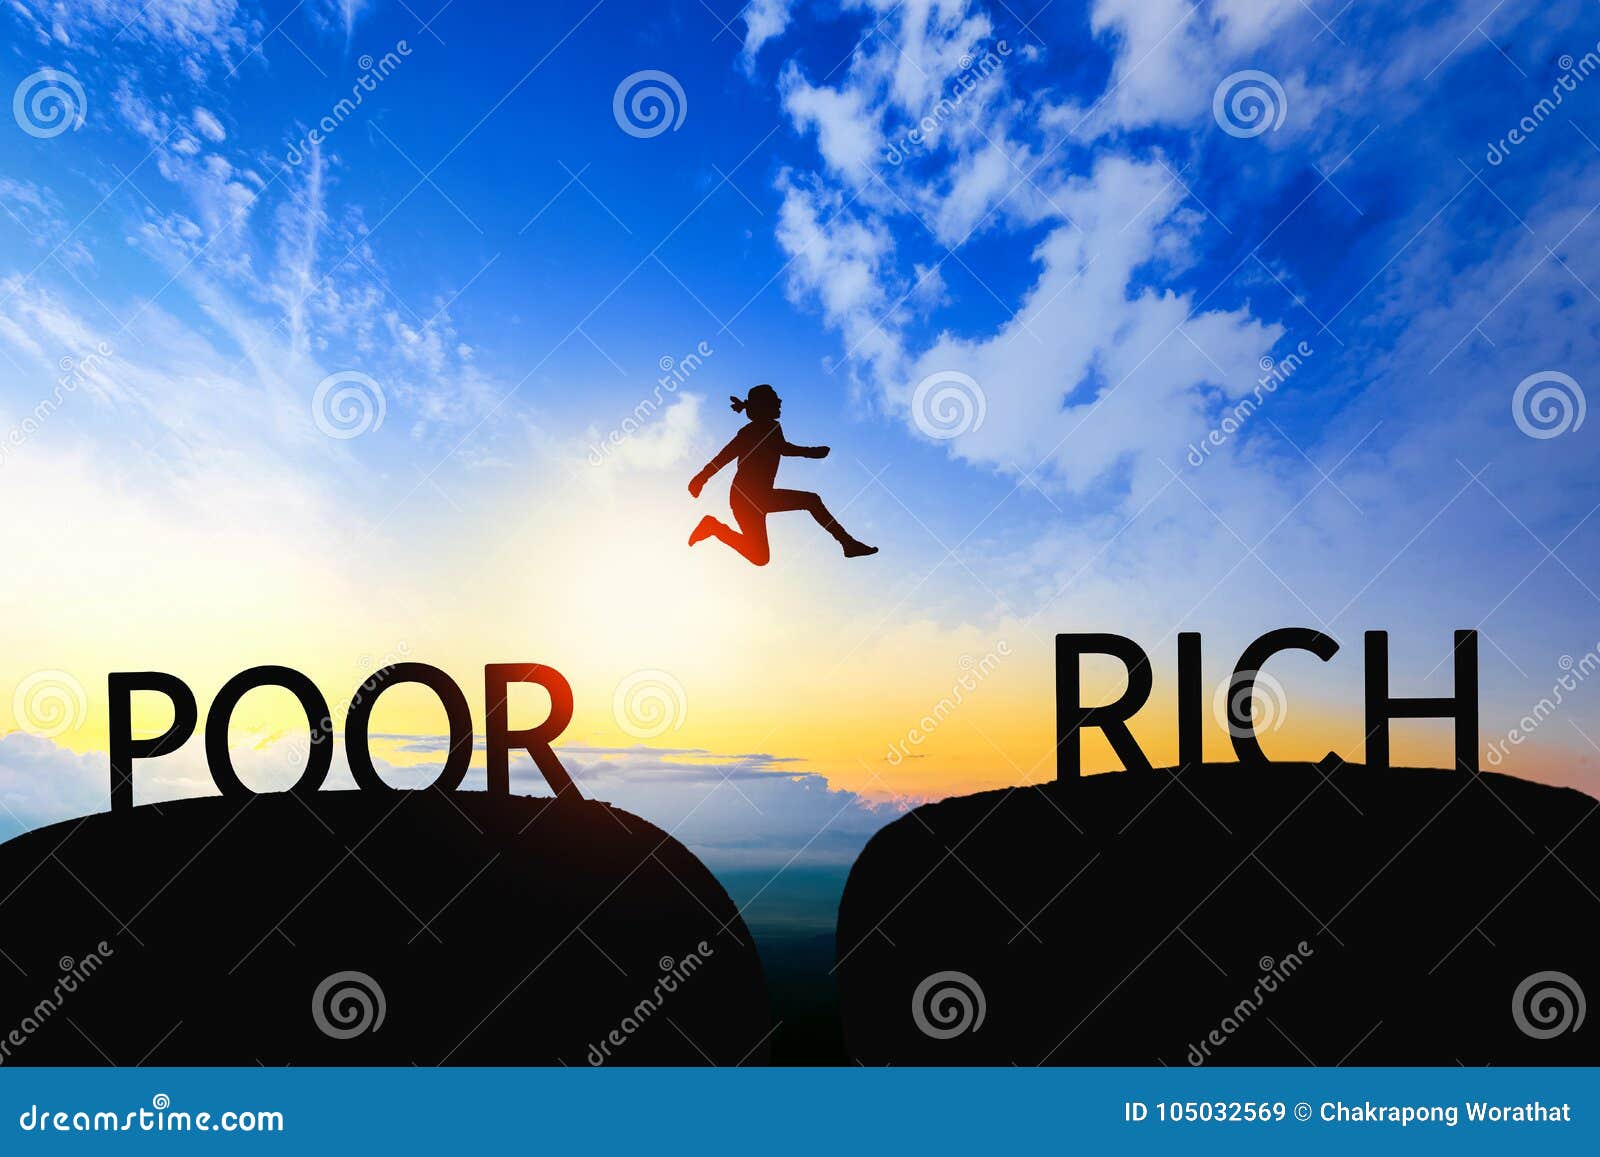 woman jump through the gap between poor to rich on sunset.